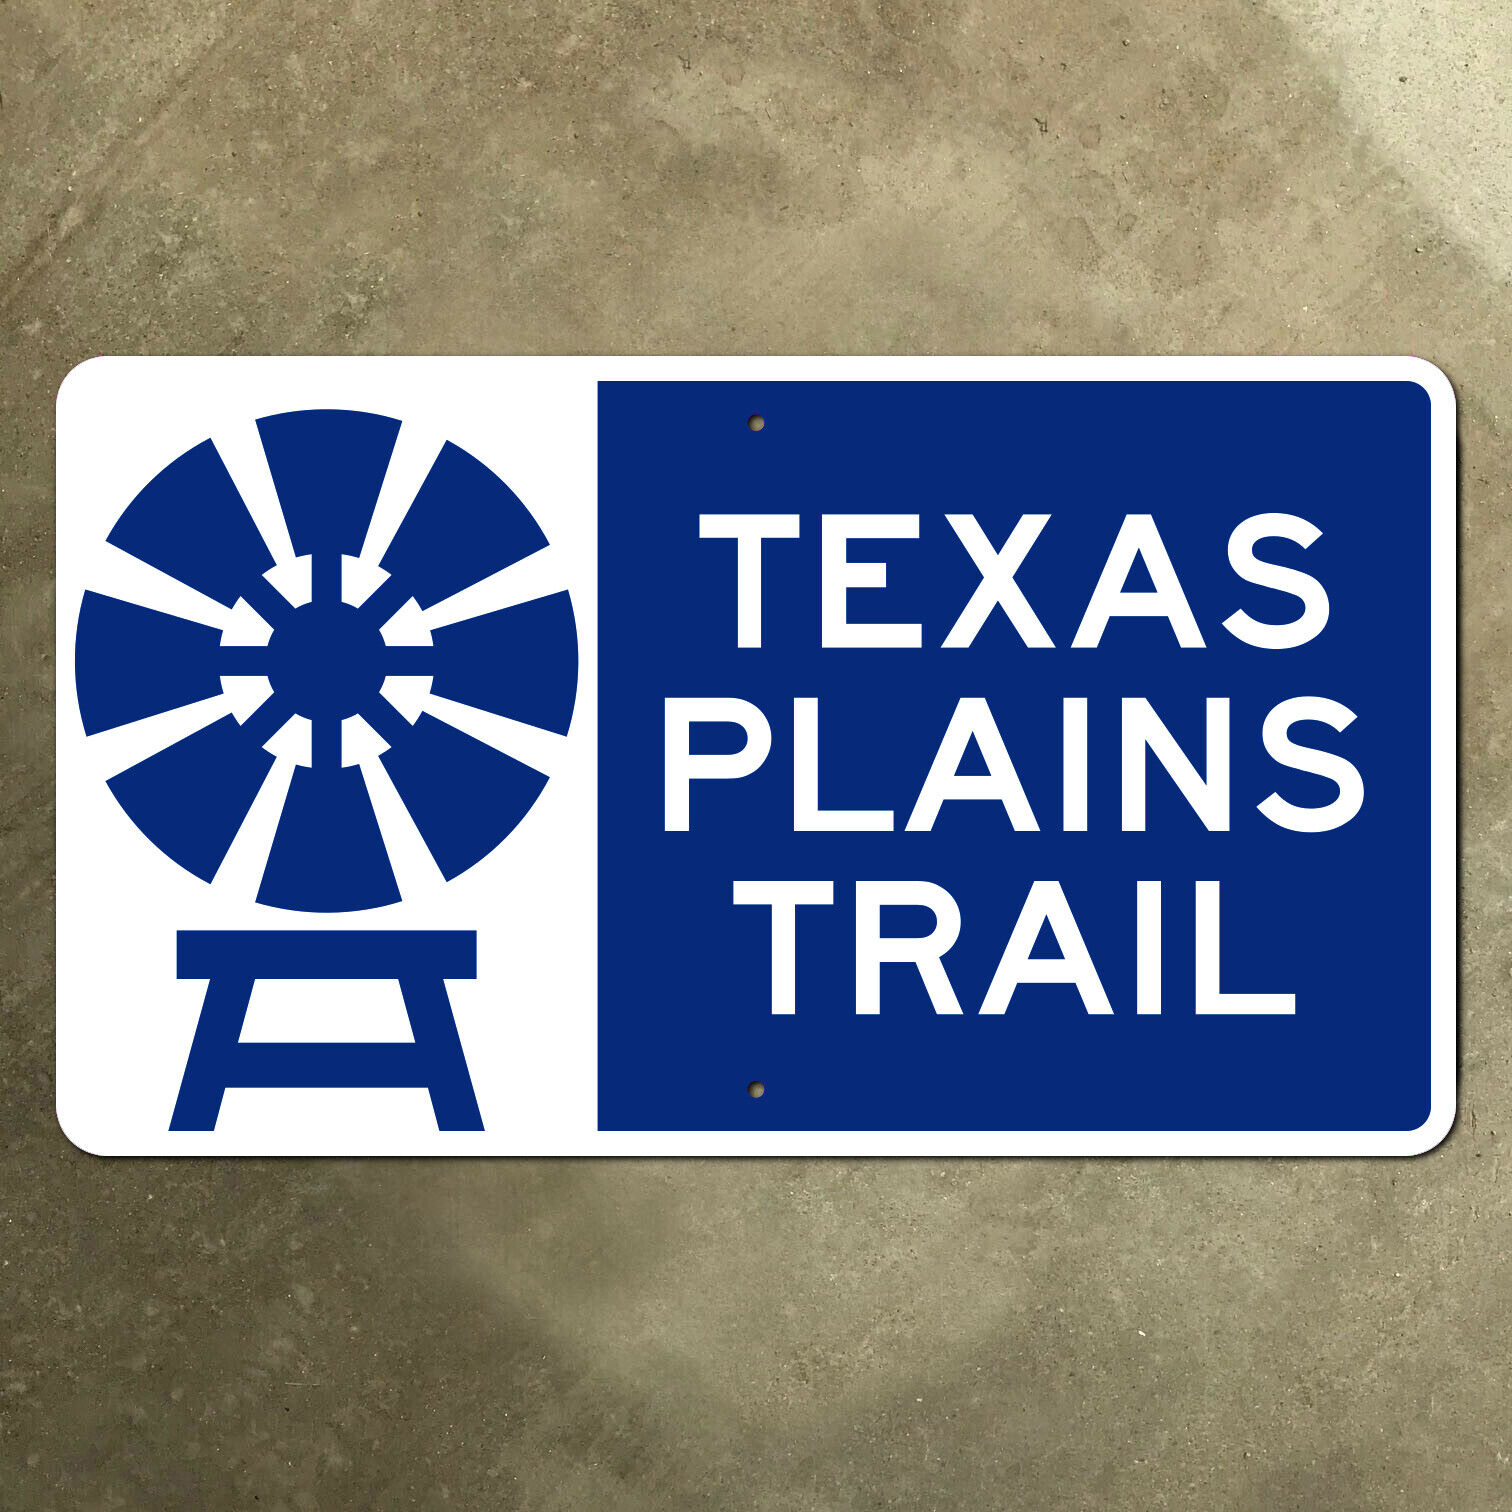 Texas Plains Trail highway road sign scenic route windmill Heritage 1998 21x12